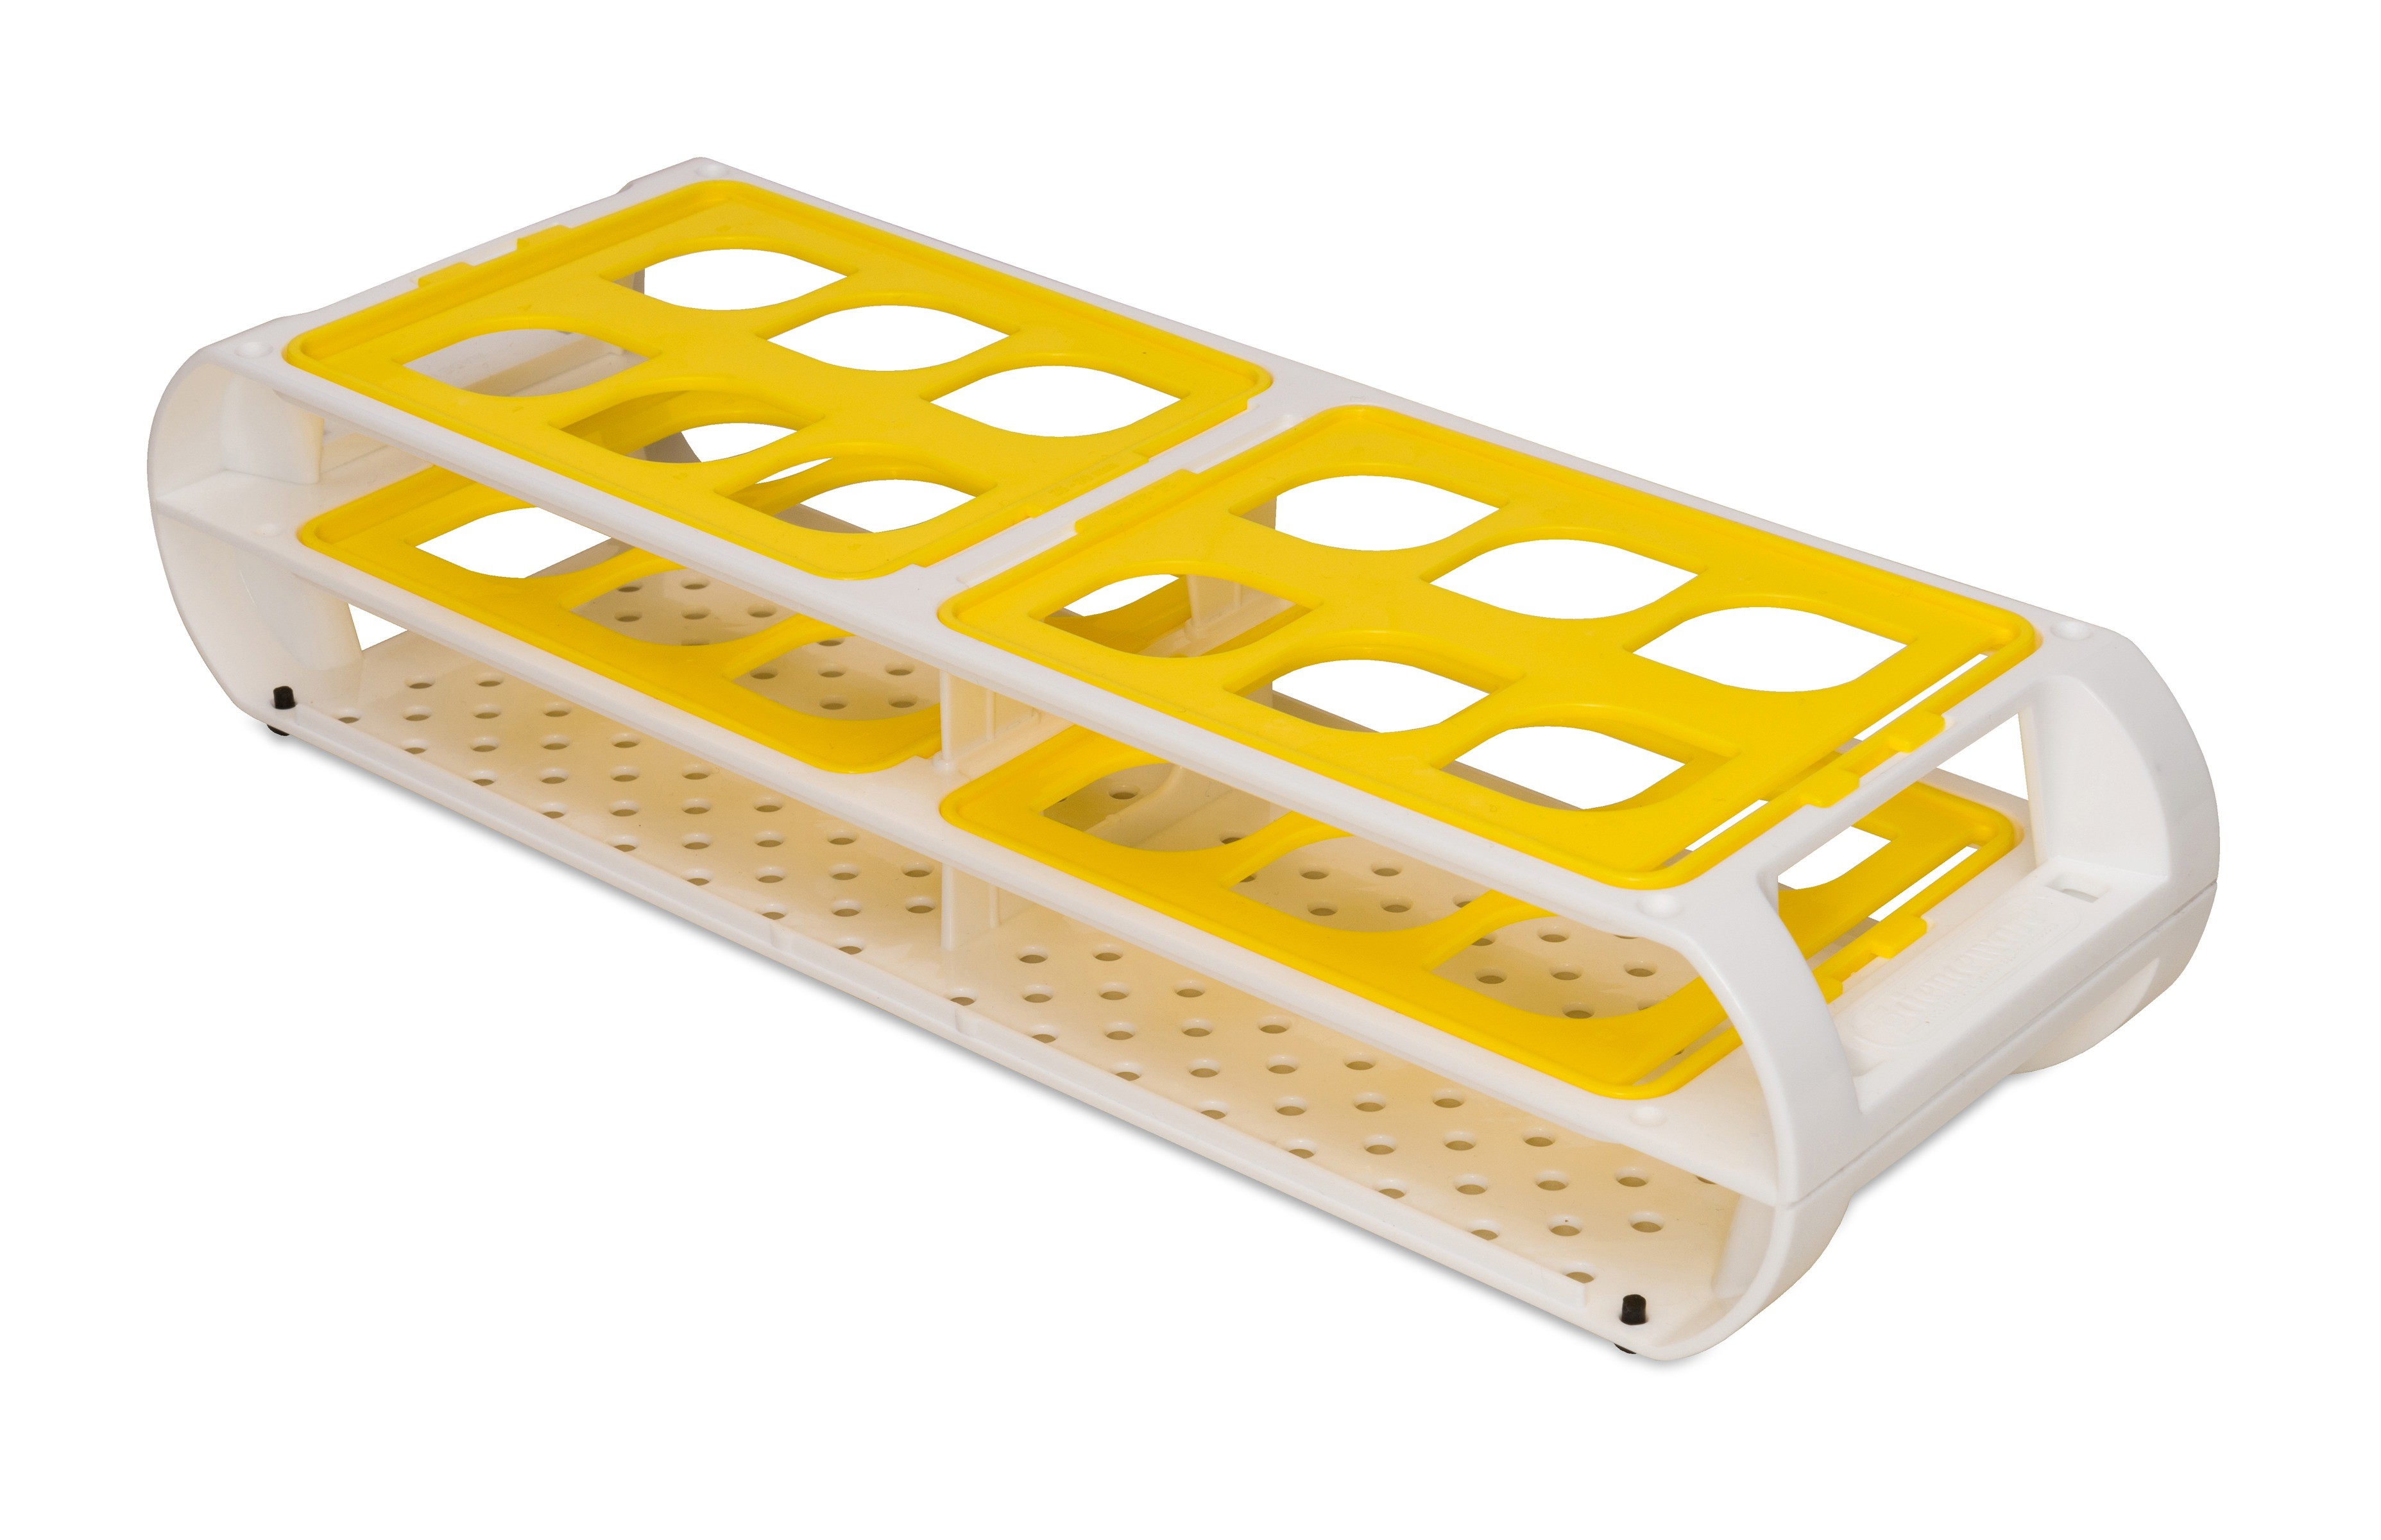 SP Bel-Art Switch-Grid Test Tube Rack; 12 Places, For 25-30mm Tubes, Yellow